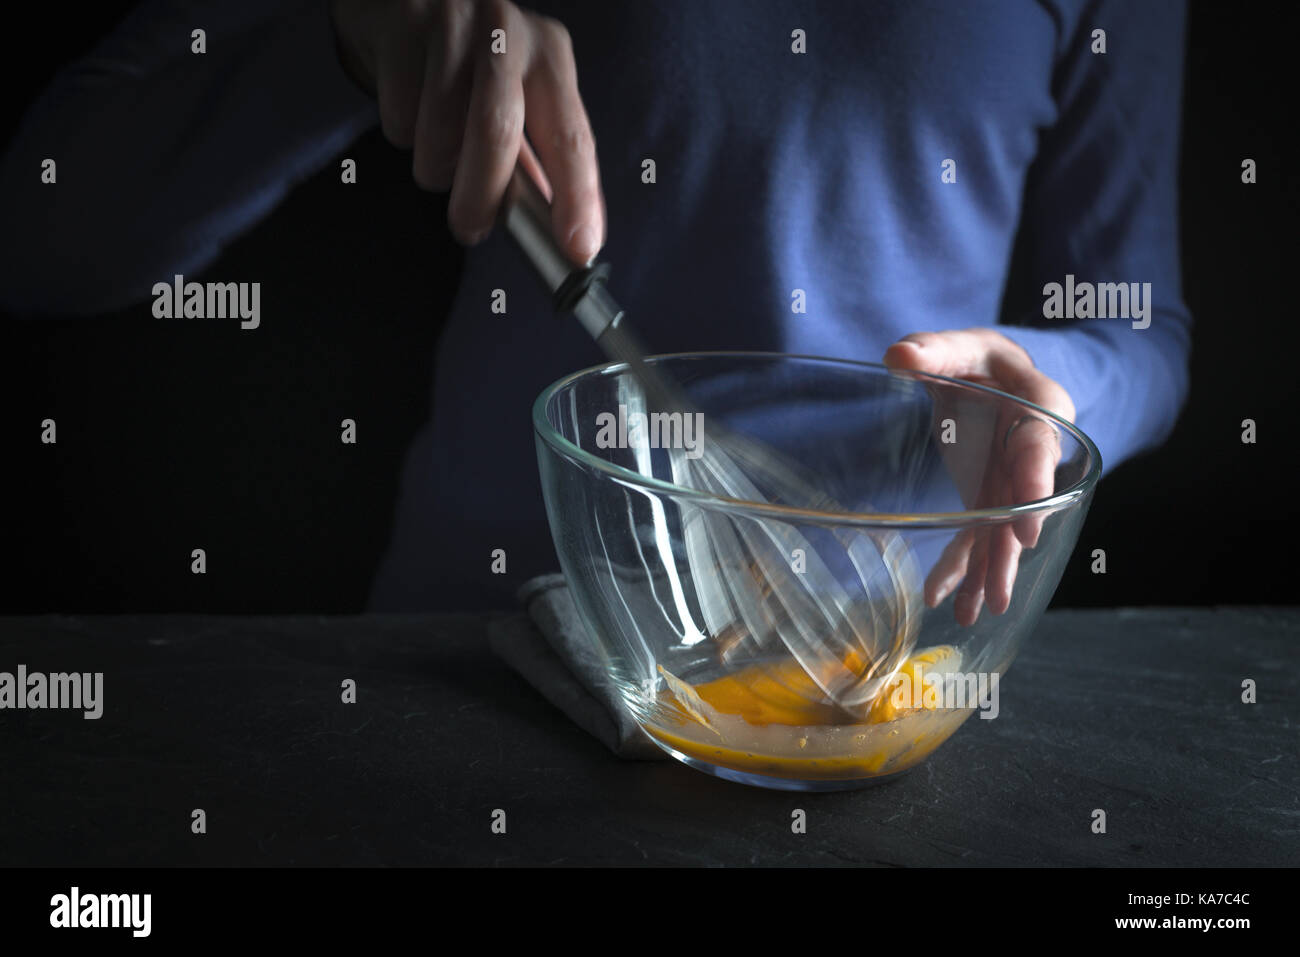 Beat yolks in a glass bowl with a whisk on a purple background horizontal Stock Photo